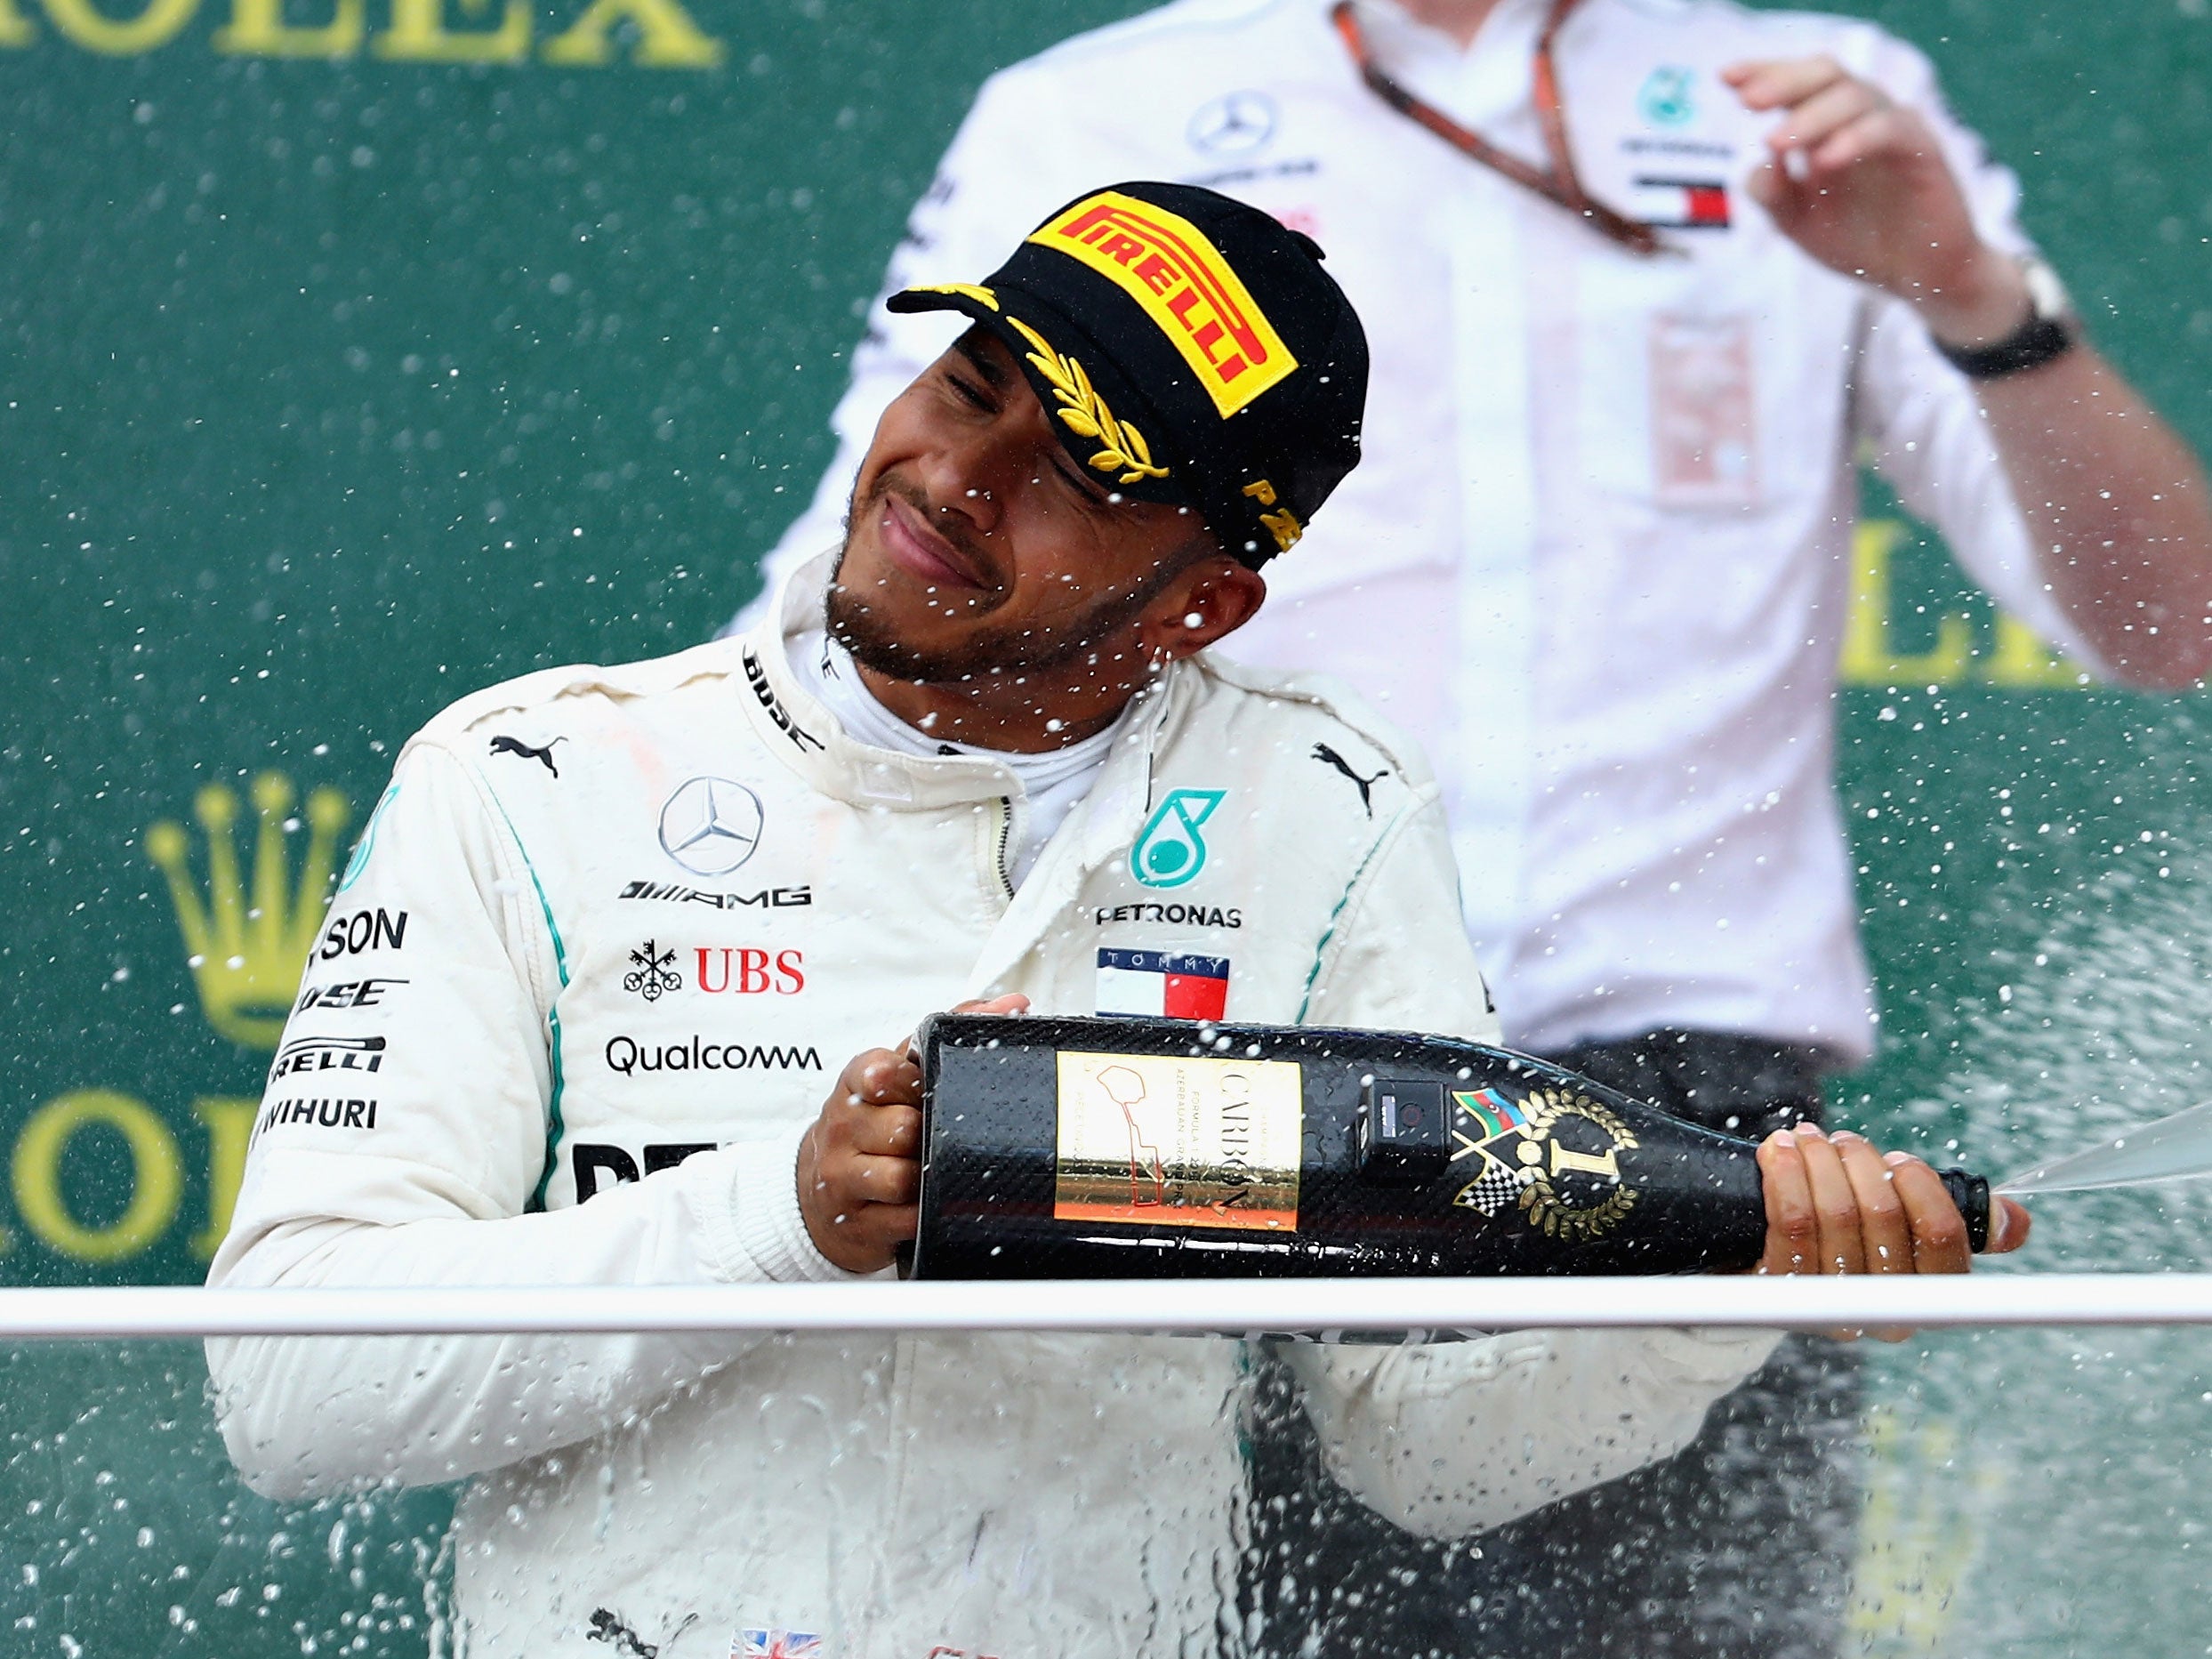 Hamilton ended his drought with the win in Baku